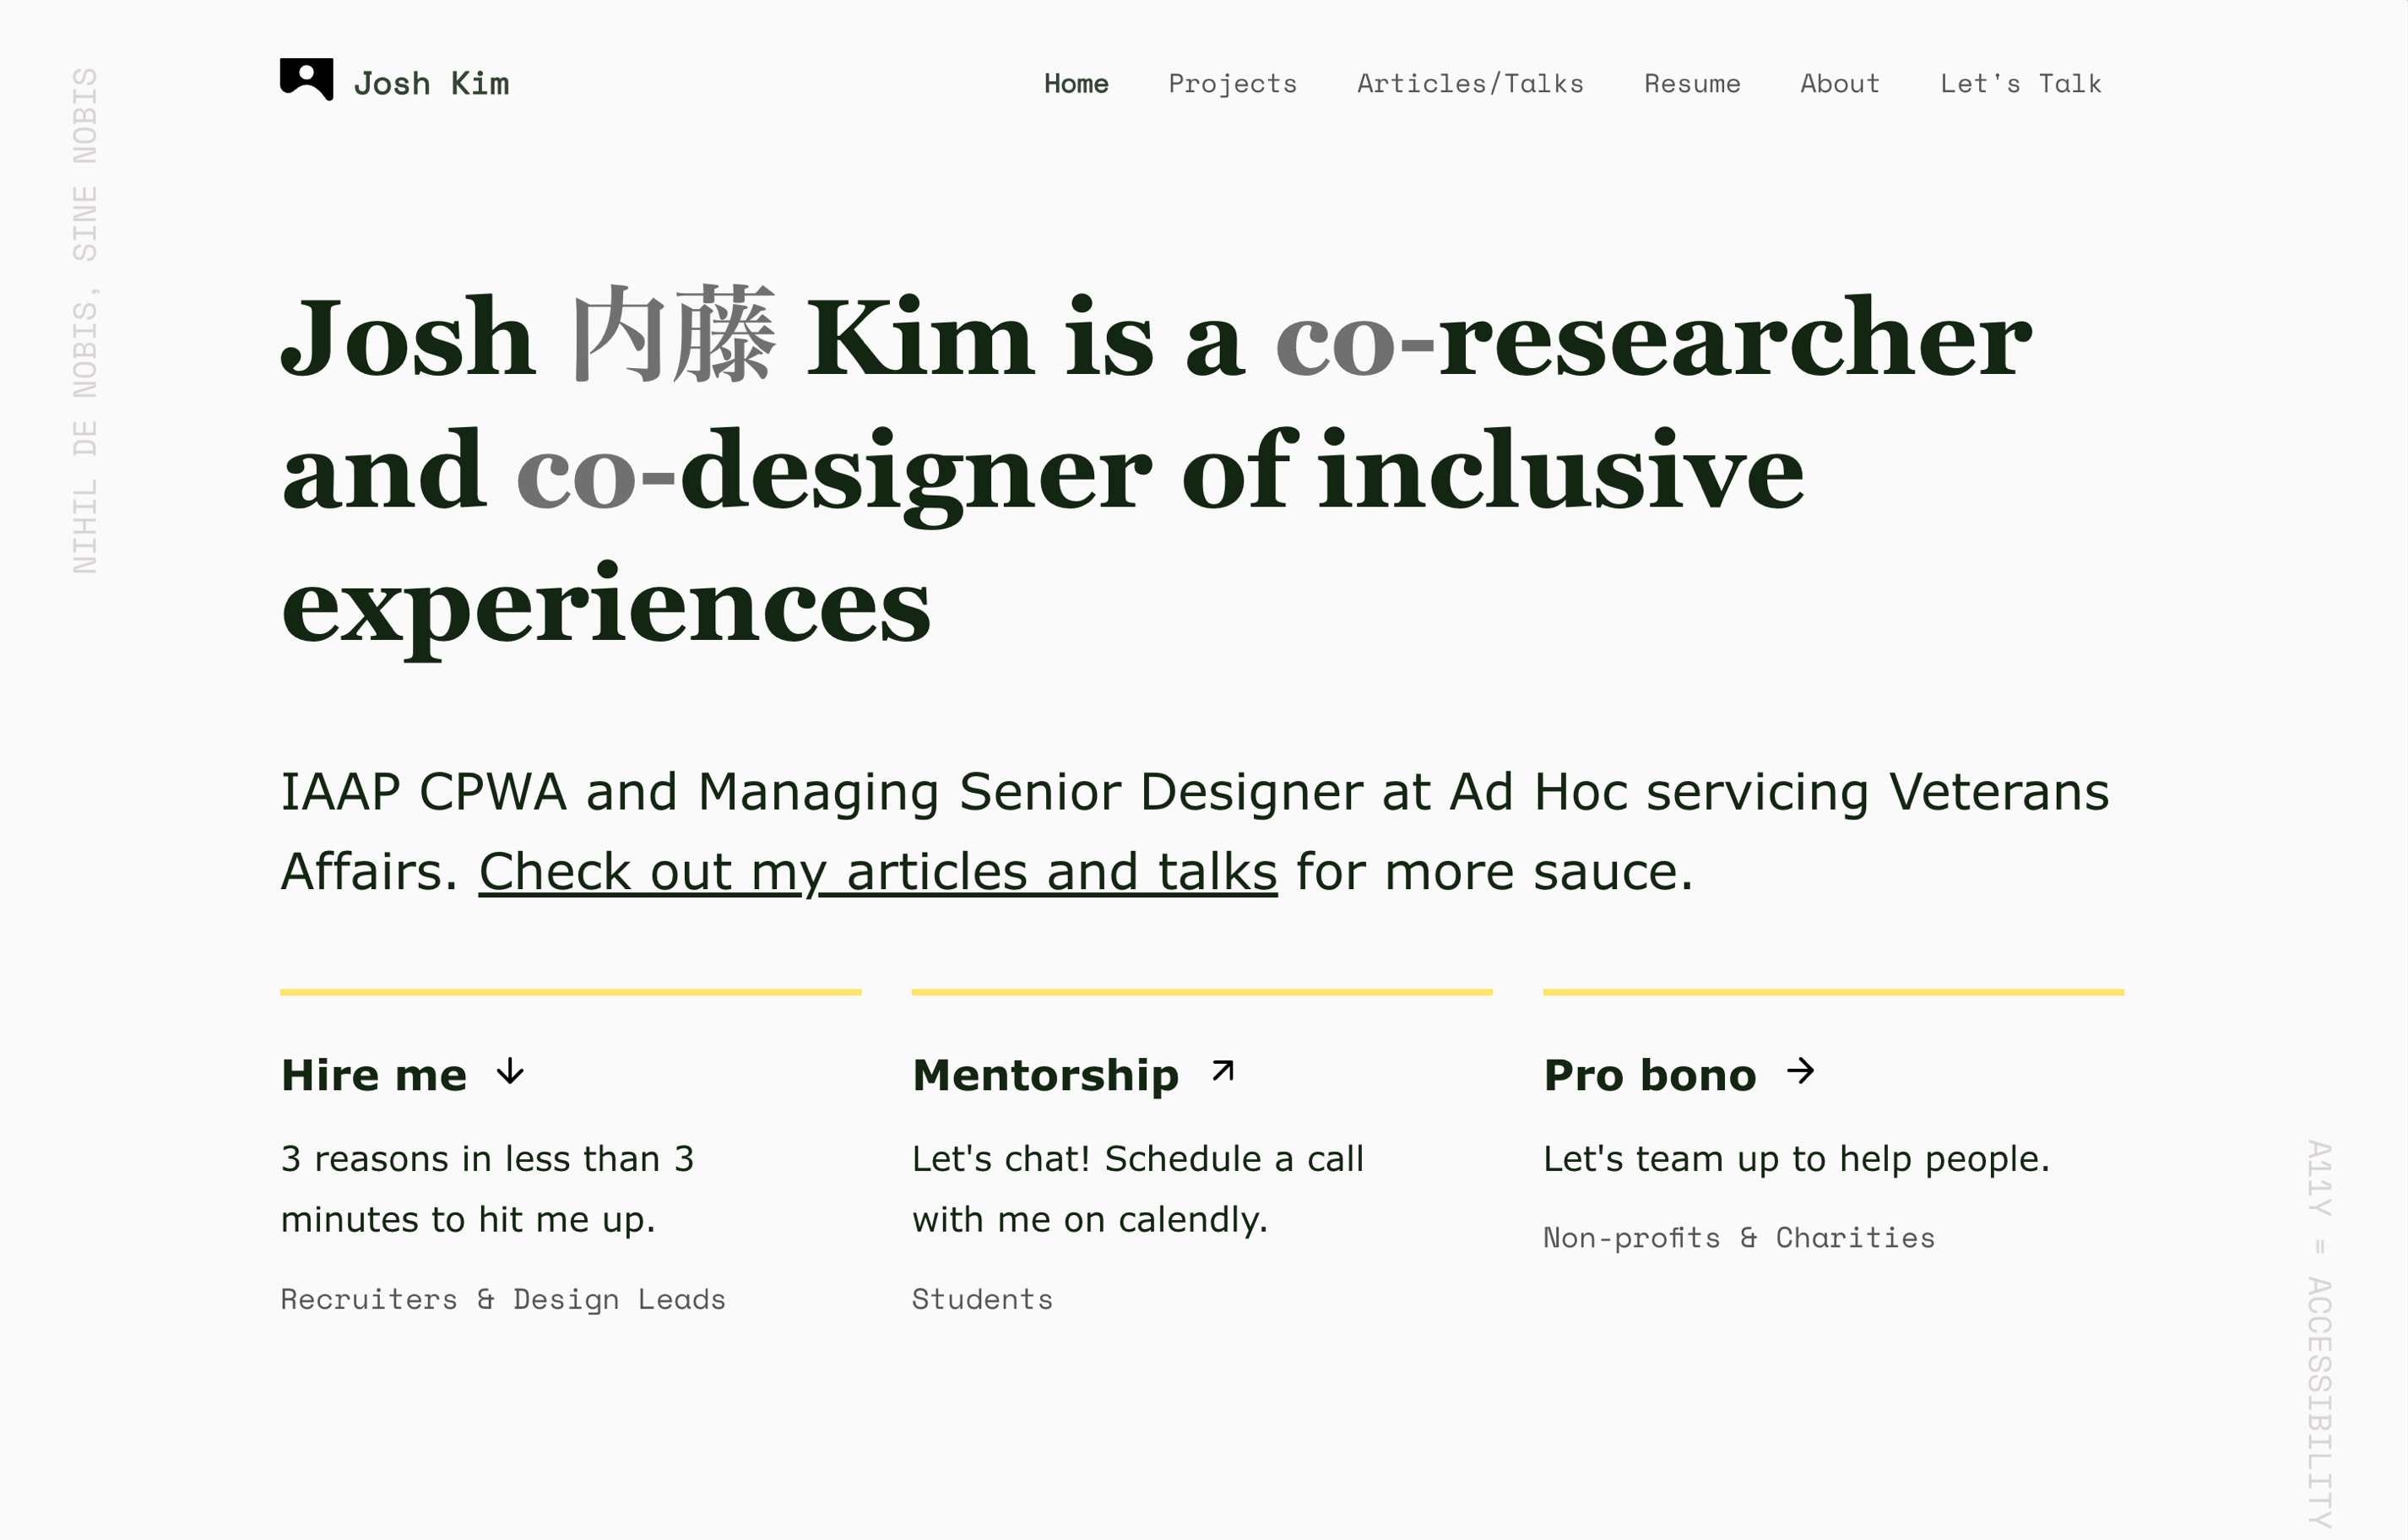 The 2021 homepage of my portfolio features a slightly shorter title and a new font family.